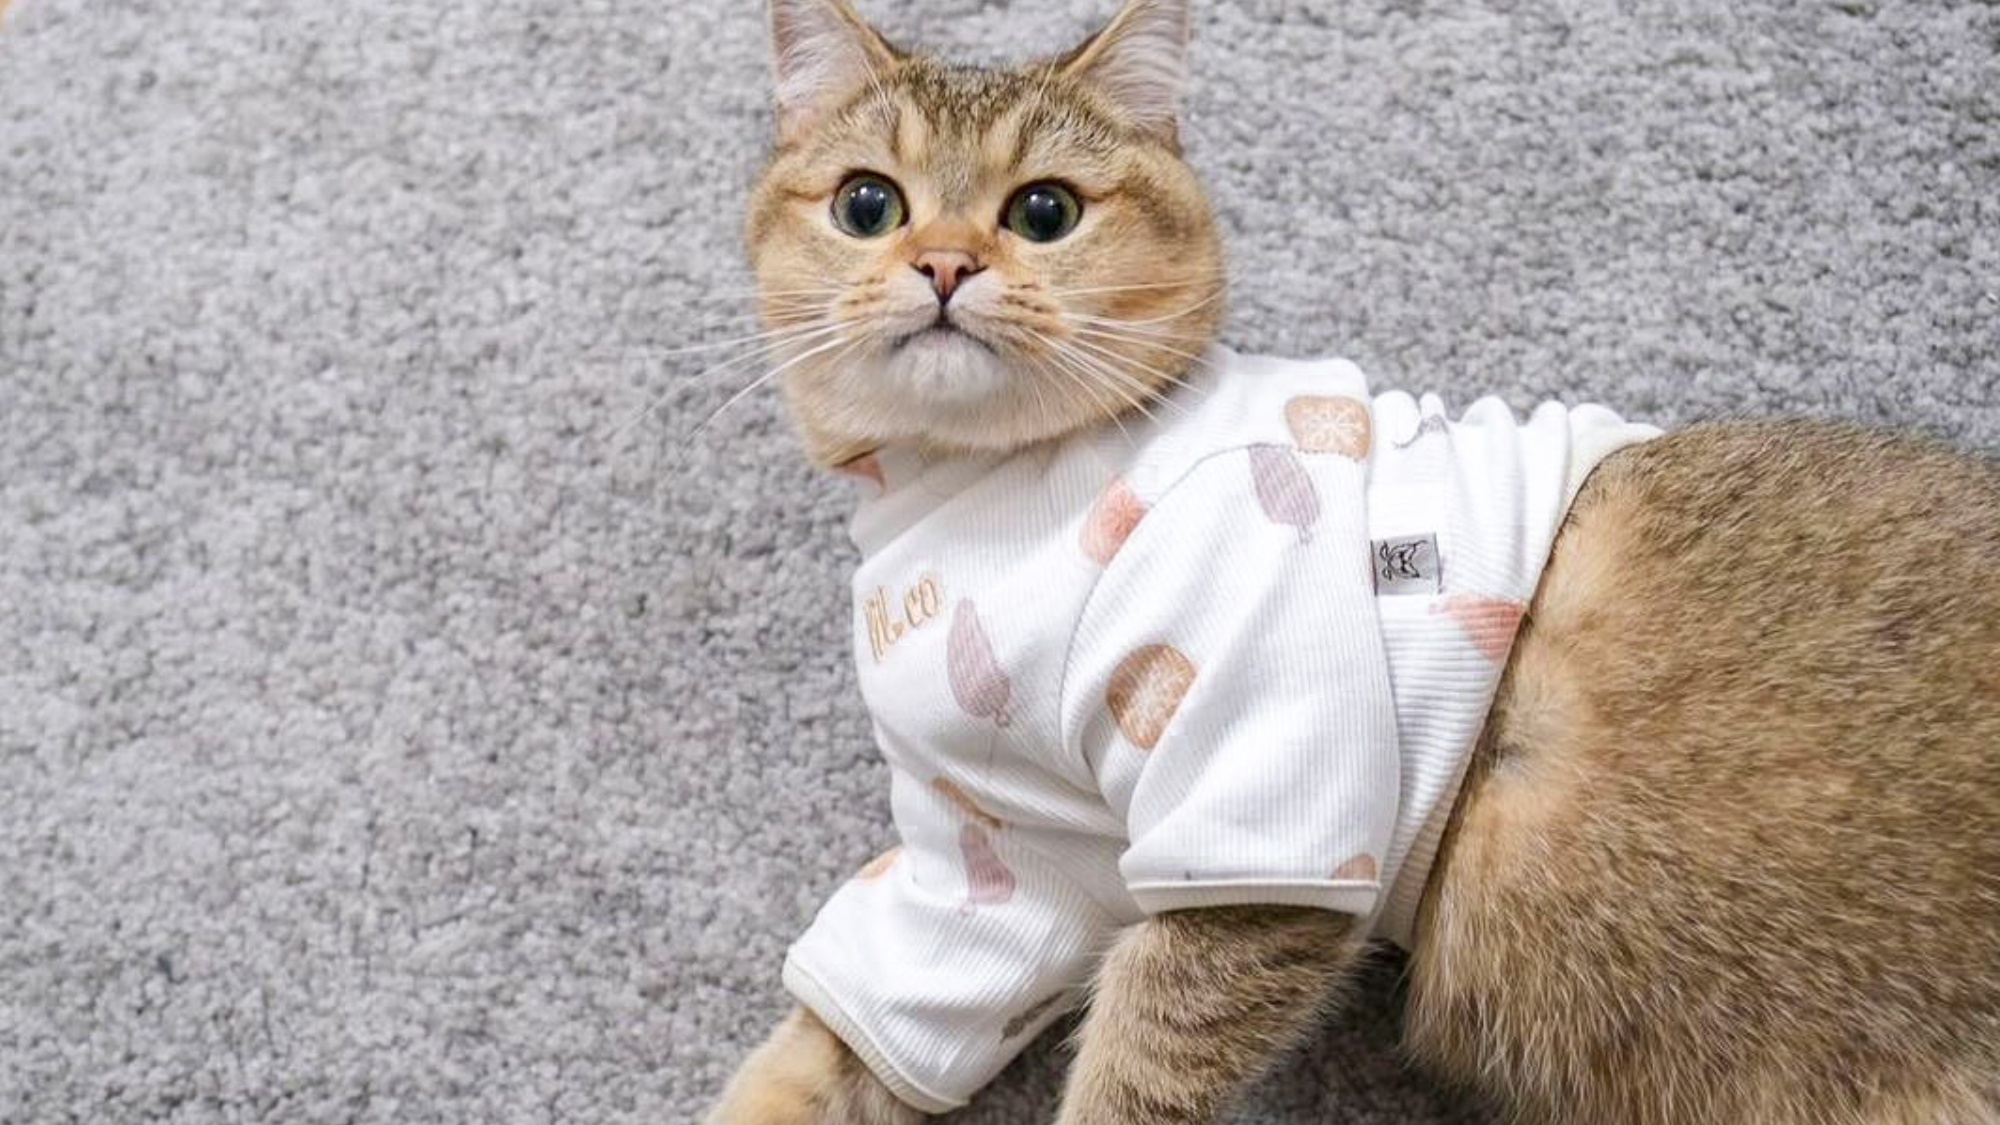 The benefits of dressing up your cat